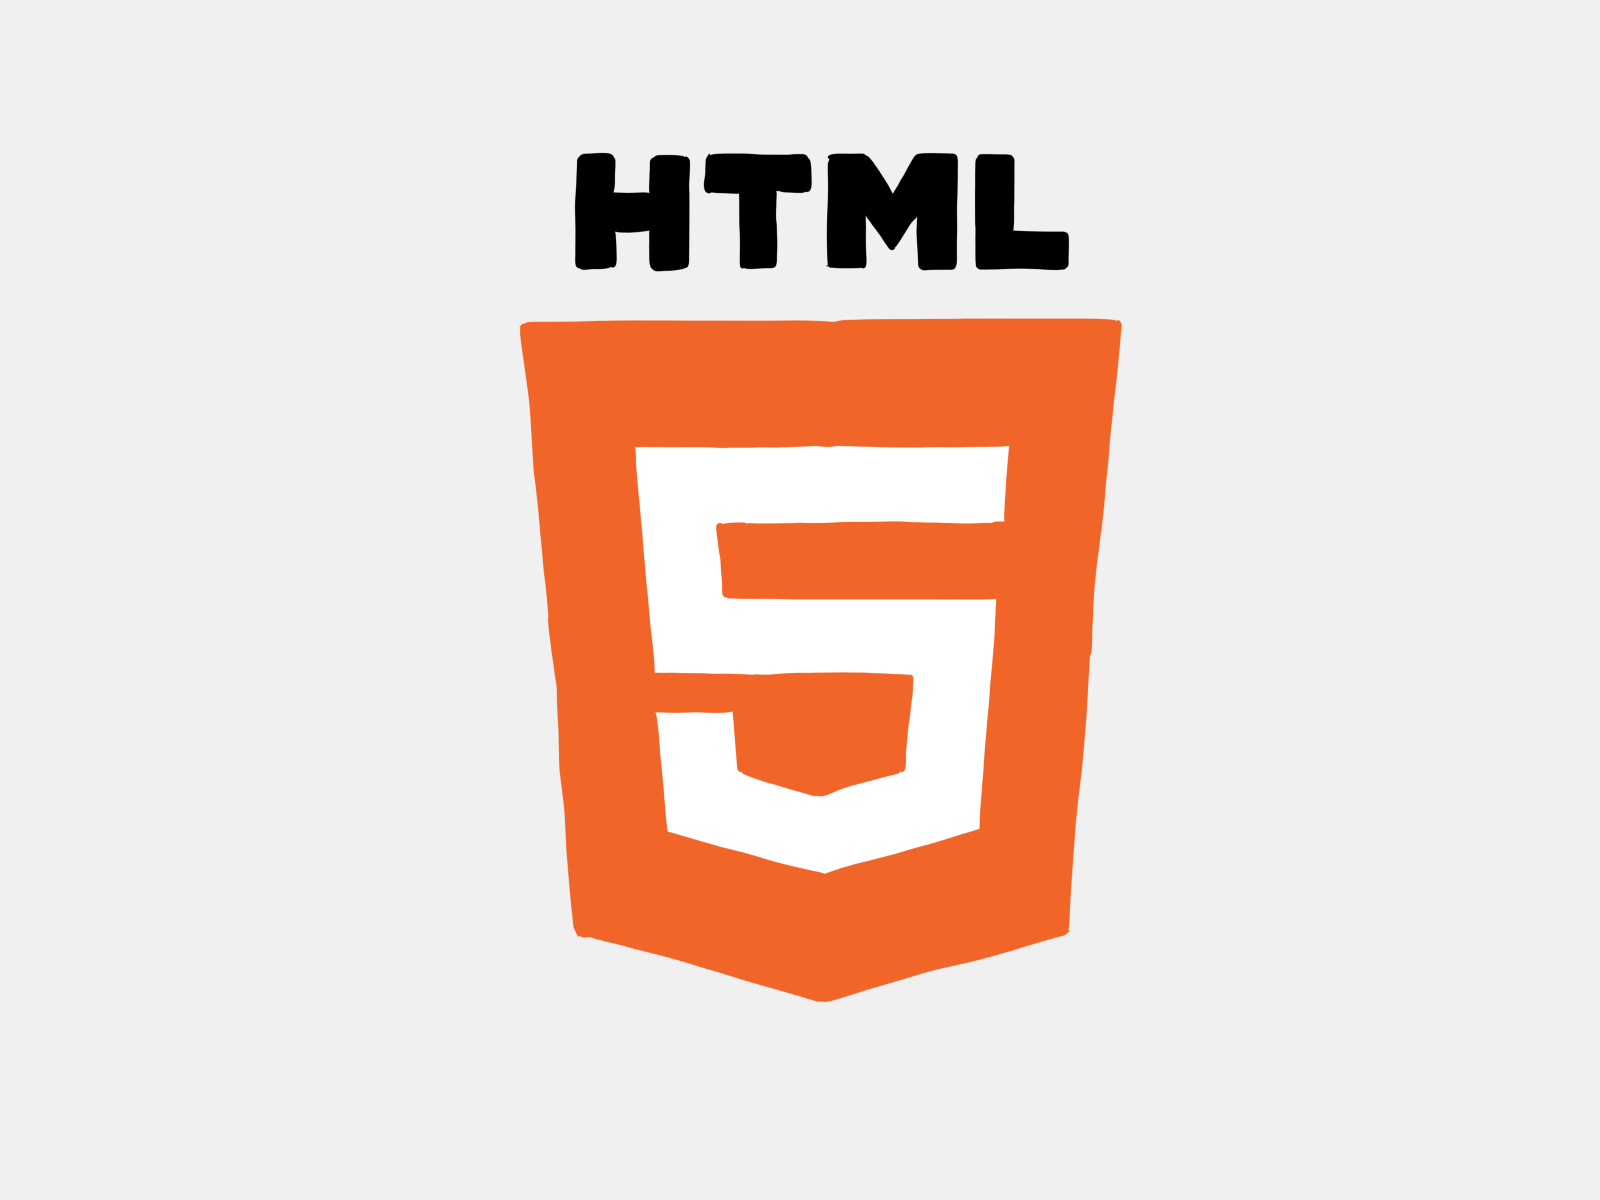 An illustration of the HTML5 logo.